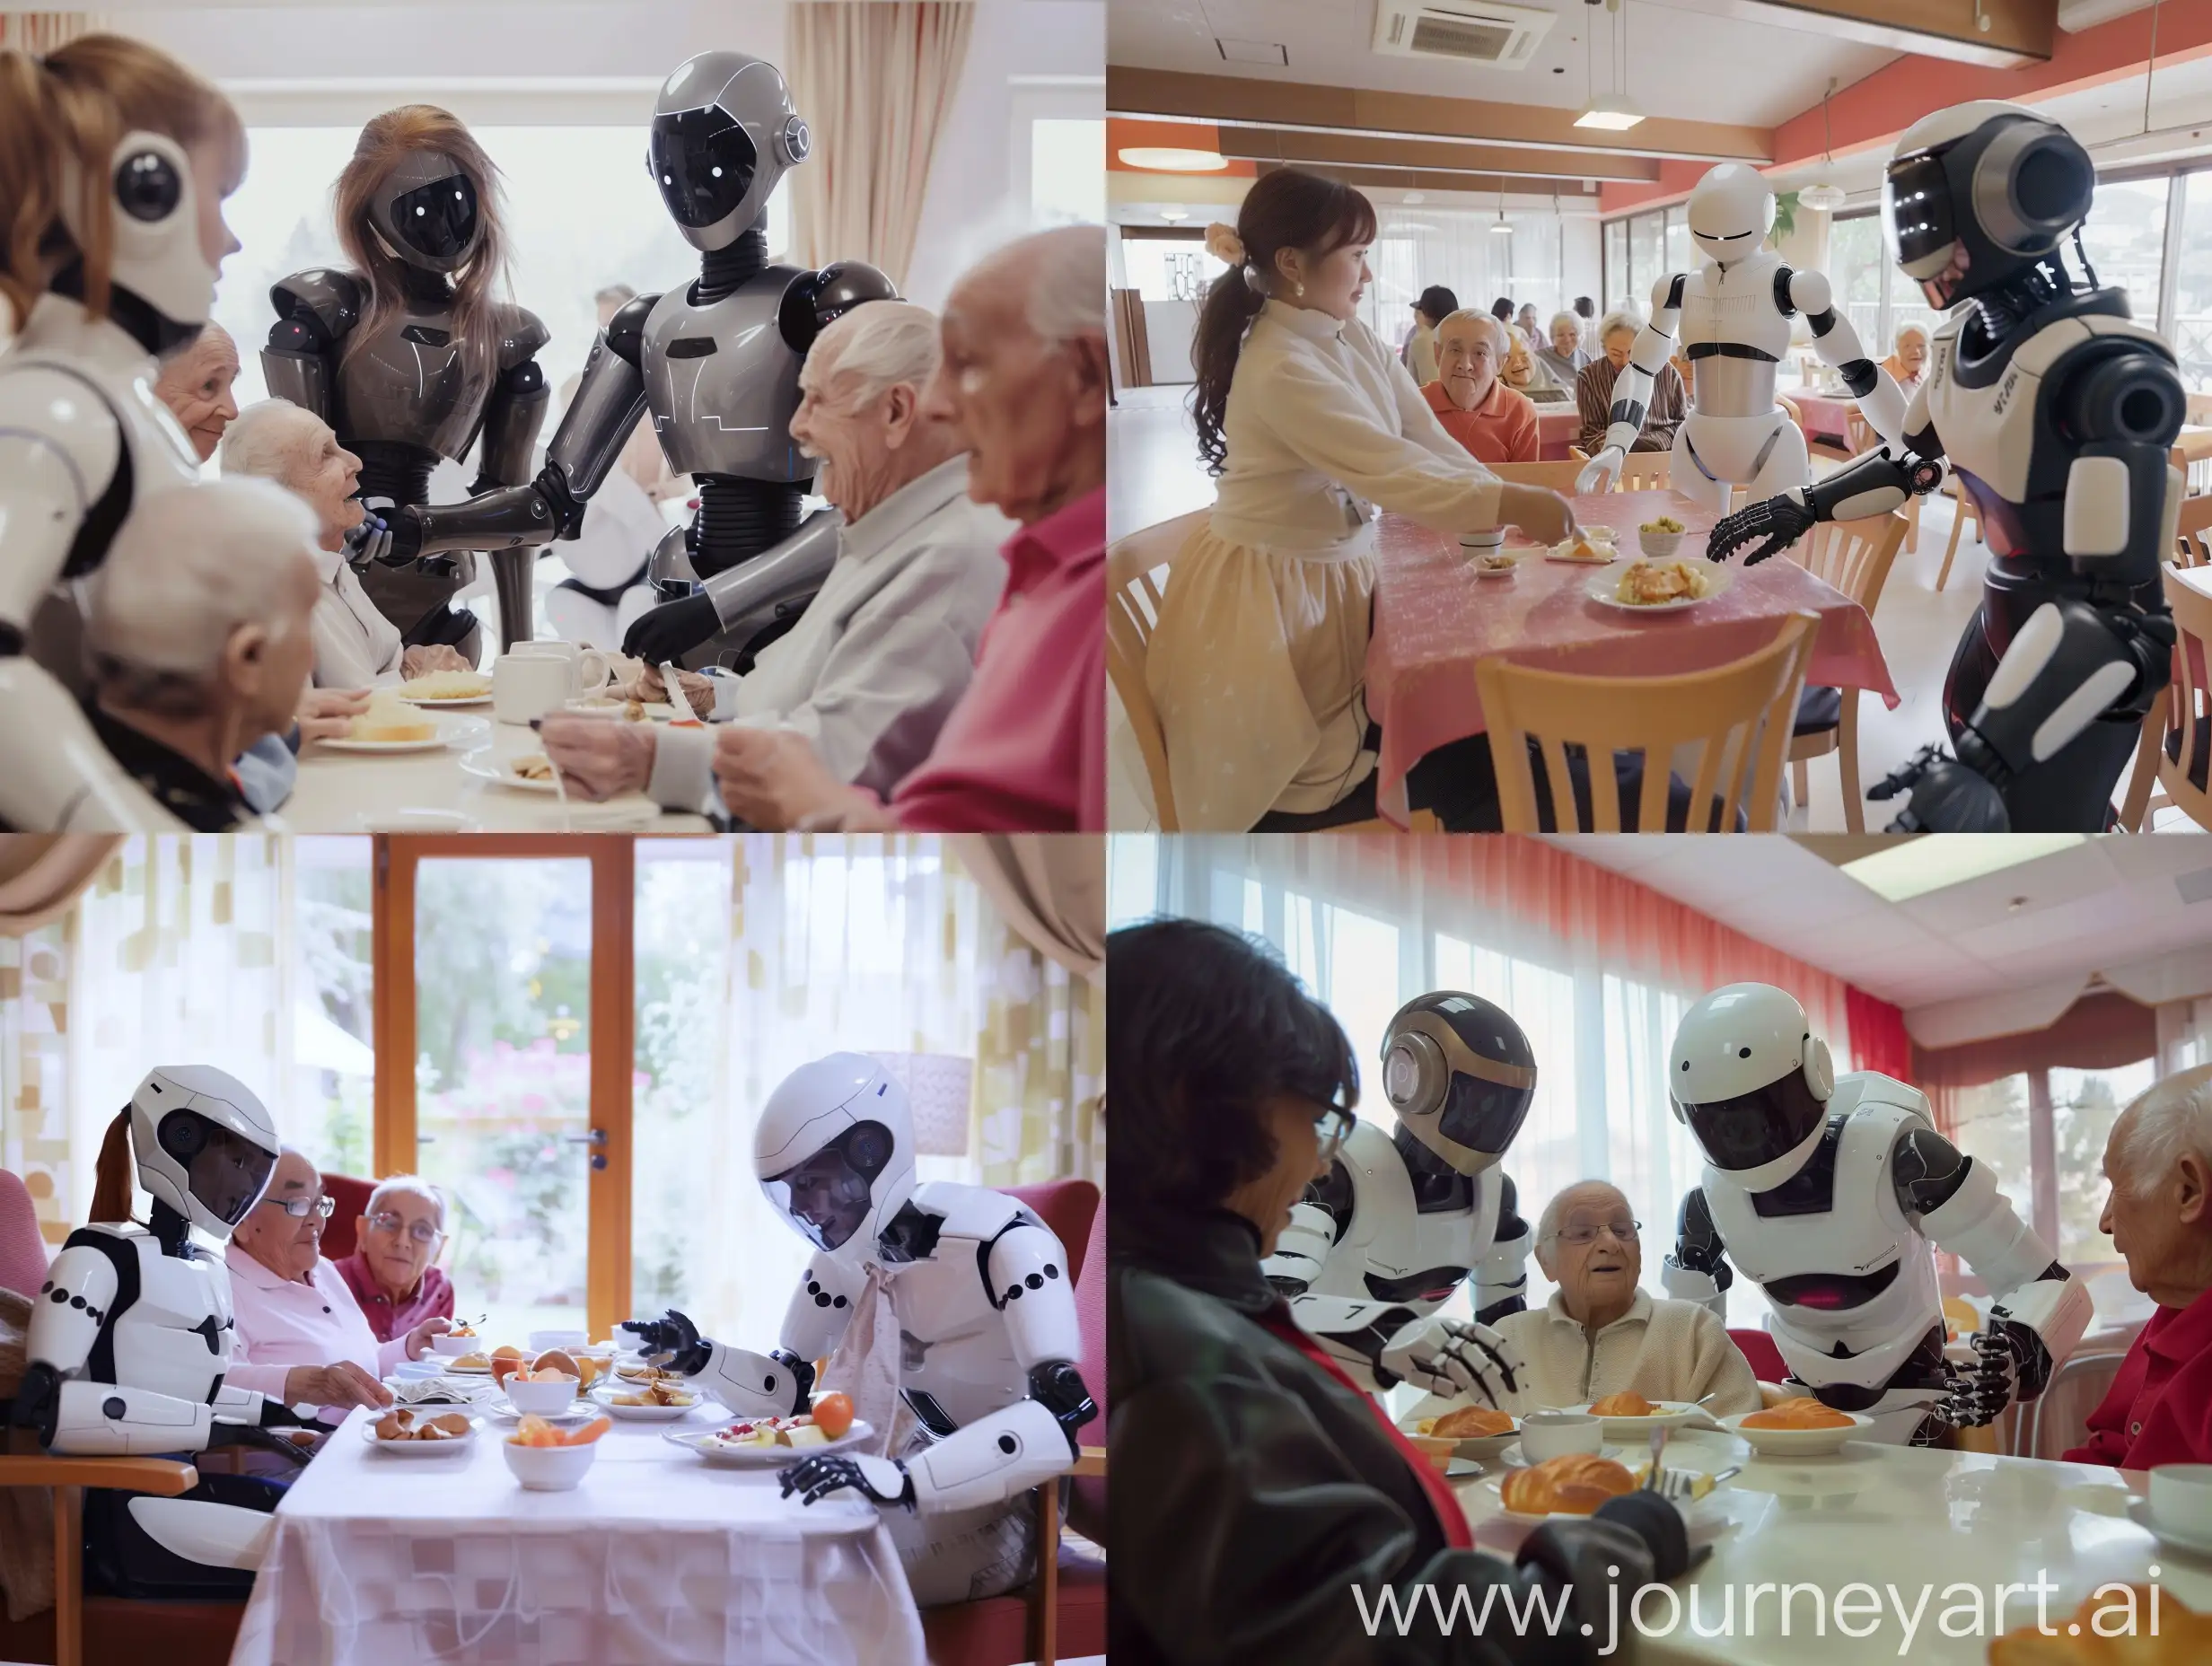 Some girl and young-man like robots in a clean and modern nursing home help with some happy old people for their lunch.